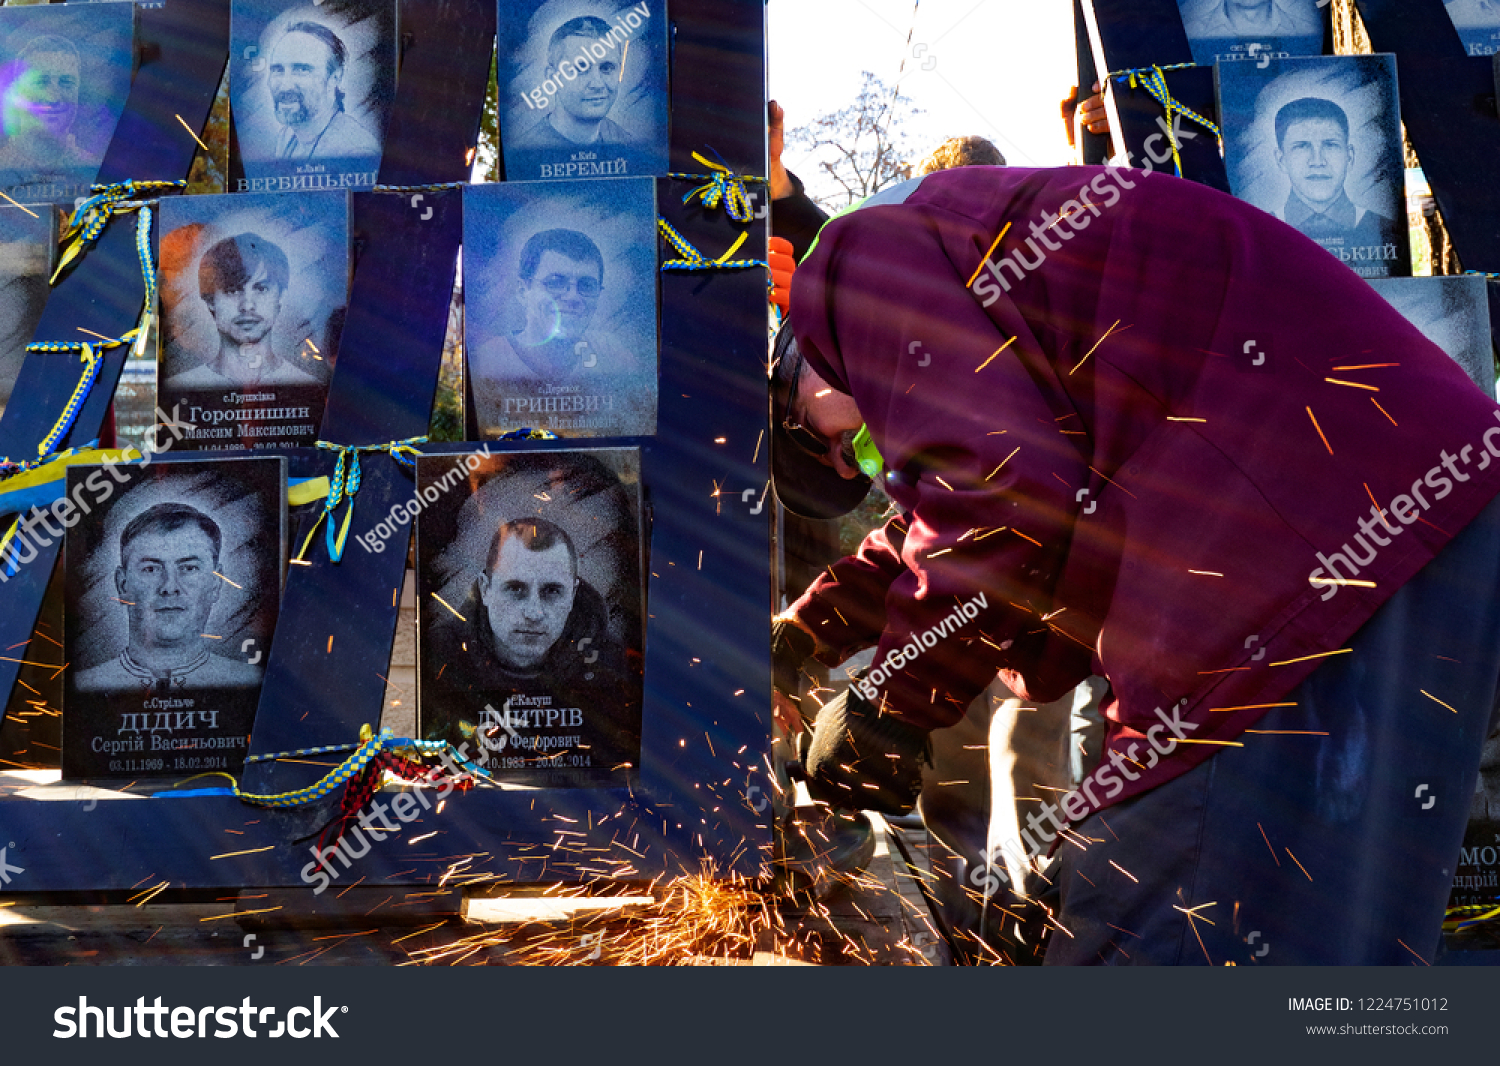 KIEV, UKRAINE - November 7, 2018:  Municipal workers are dismantling the 'Heroes of the Heavenly Hundred'  memorial, dedicated to Euromaidan activists who was killed during anti-government clashes